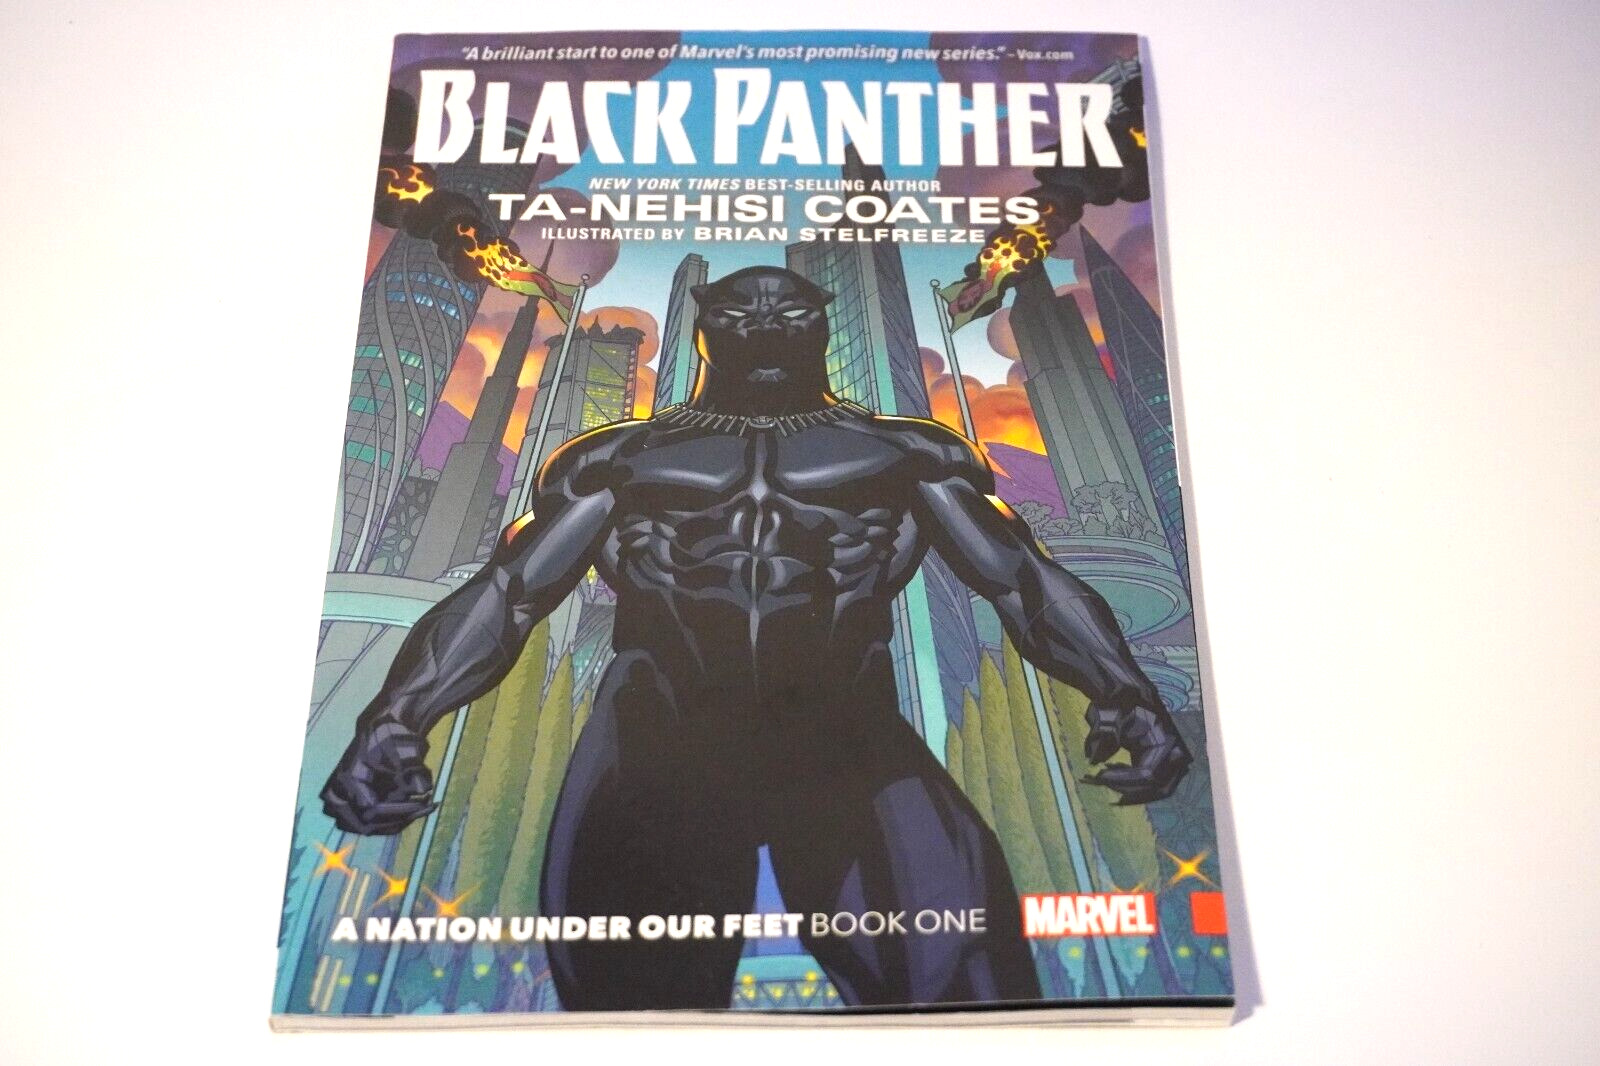 BLACK PANTHER: A NATION UNDER OUR FEET BY TA-NEHISI COATES FIRST PRINTING MARVEL